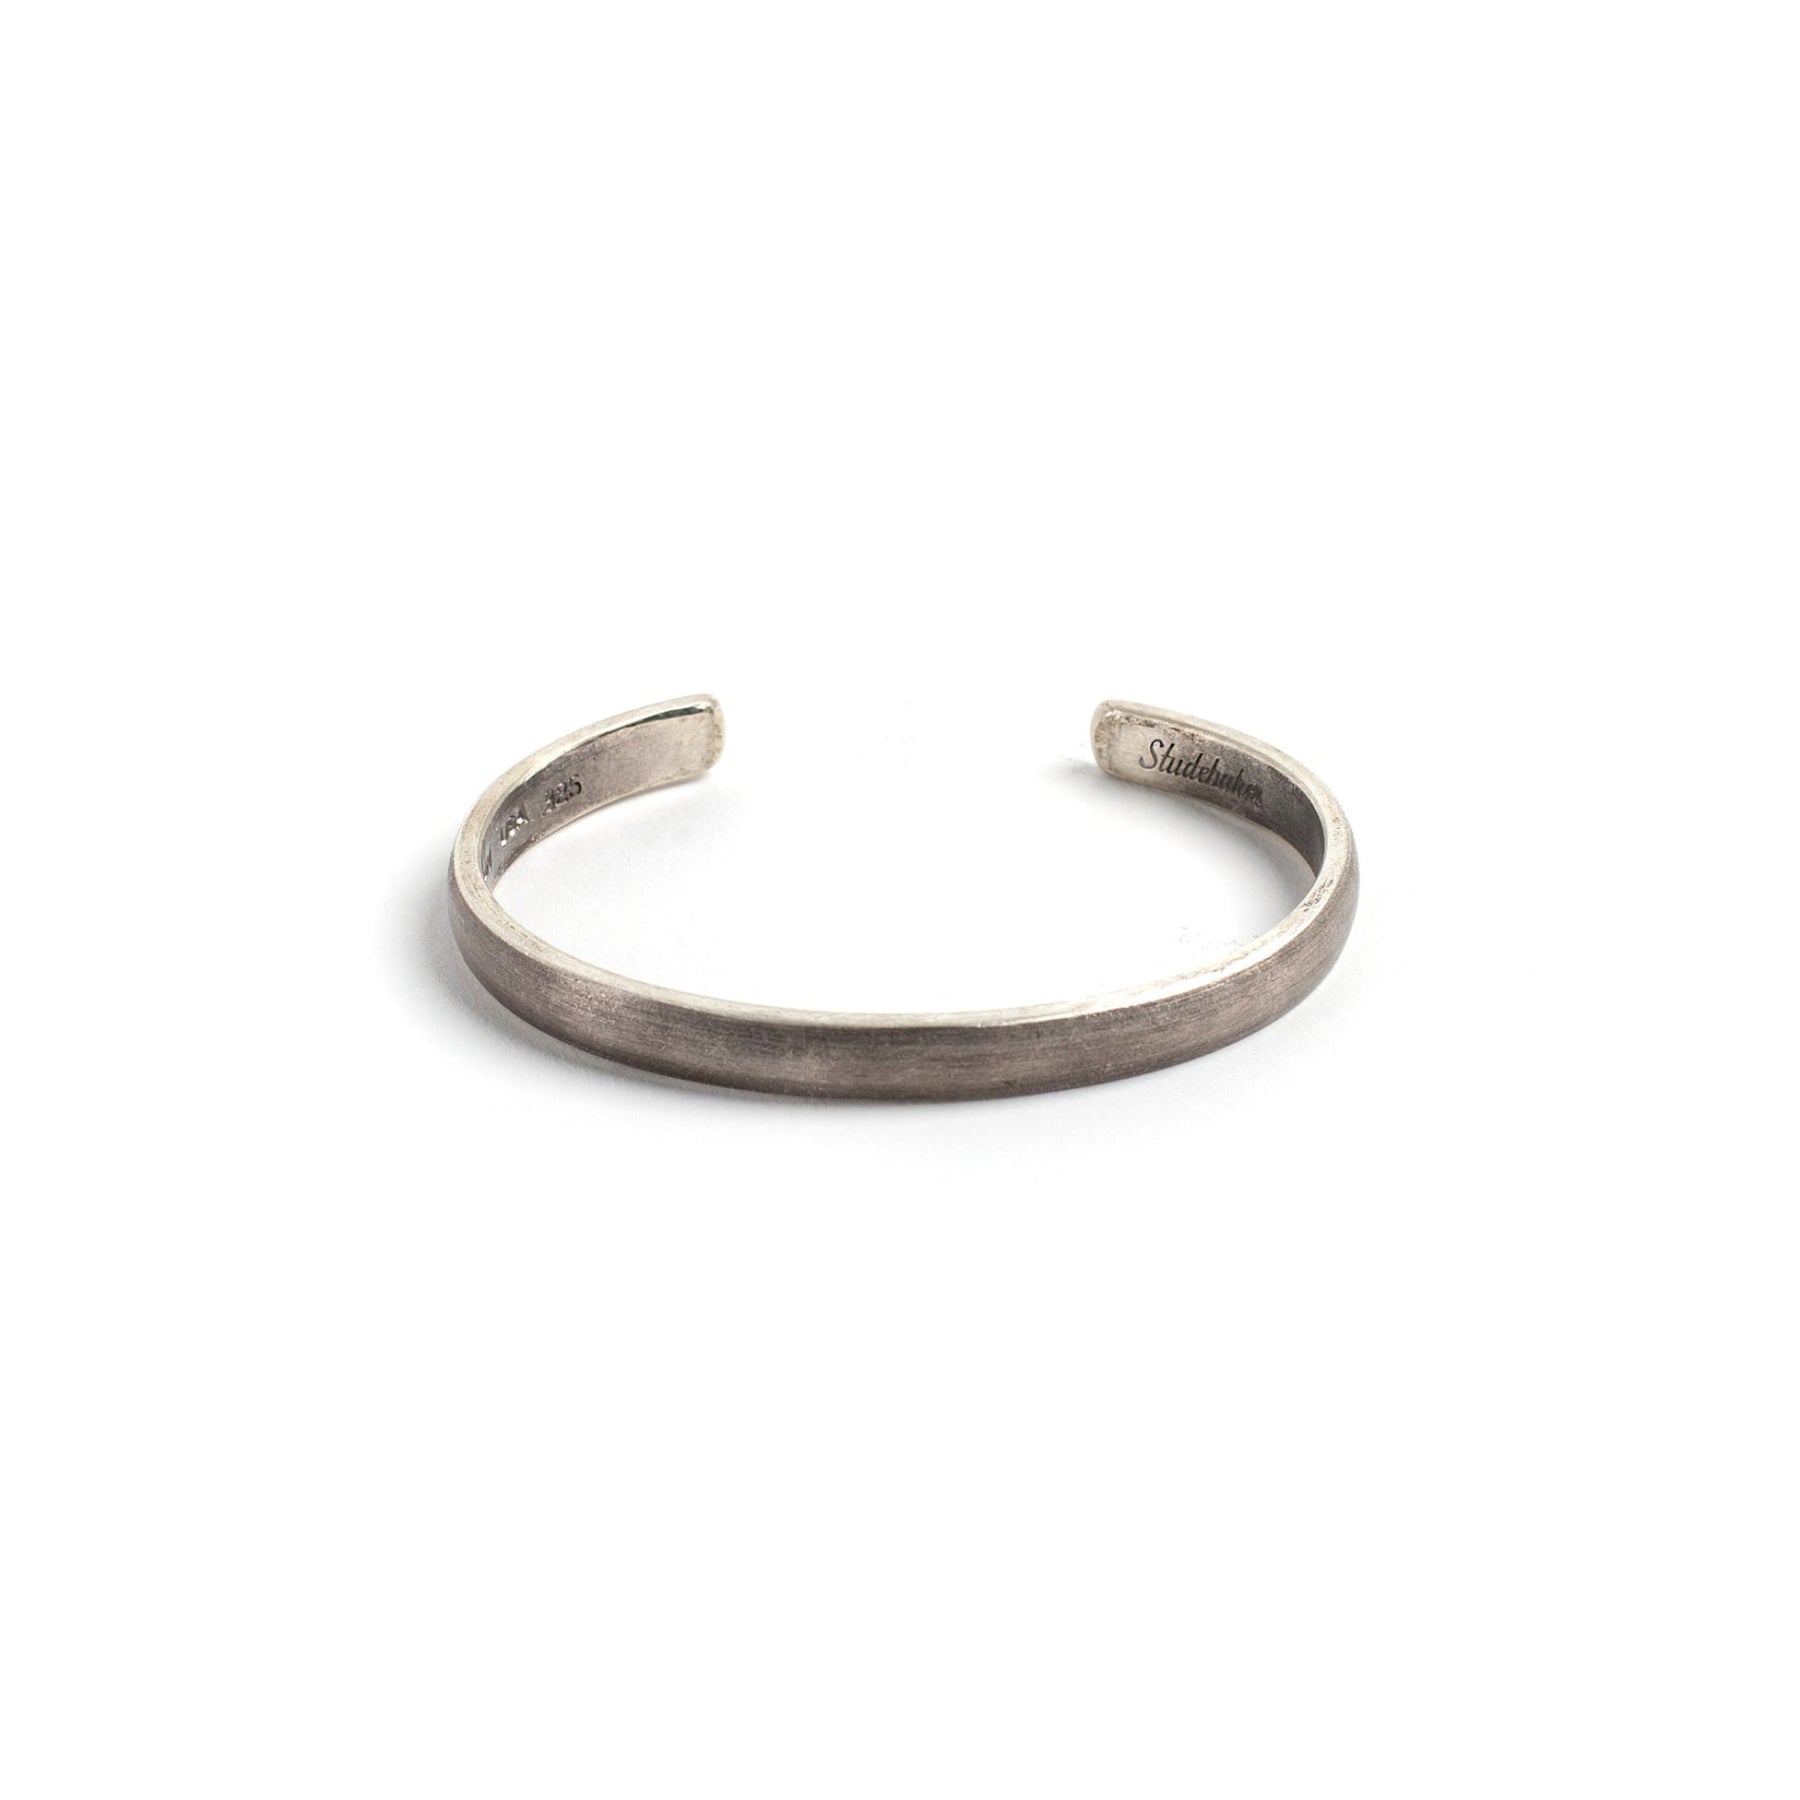 Hand Forged Iron Bracelet From Viking - Etsy | Bracelets with meaning,  Contemporary handmade jewelry, Iron jewelry